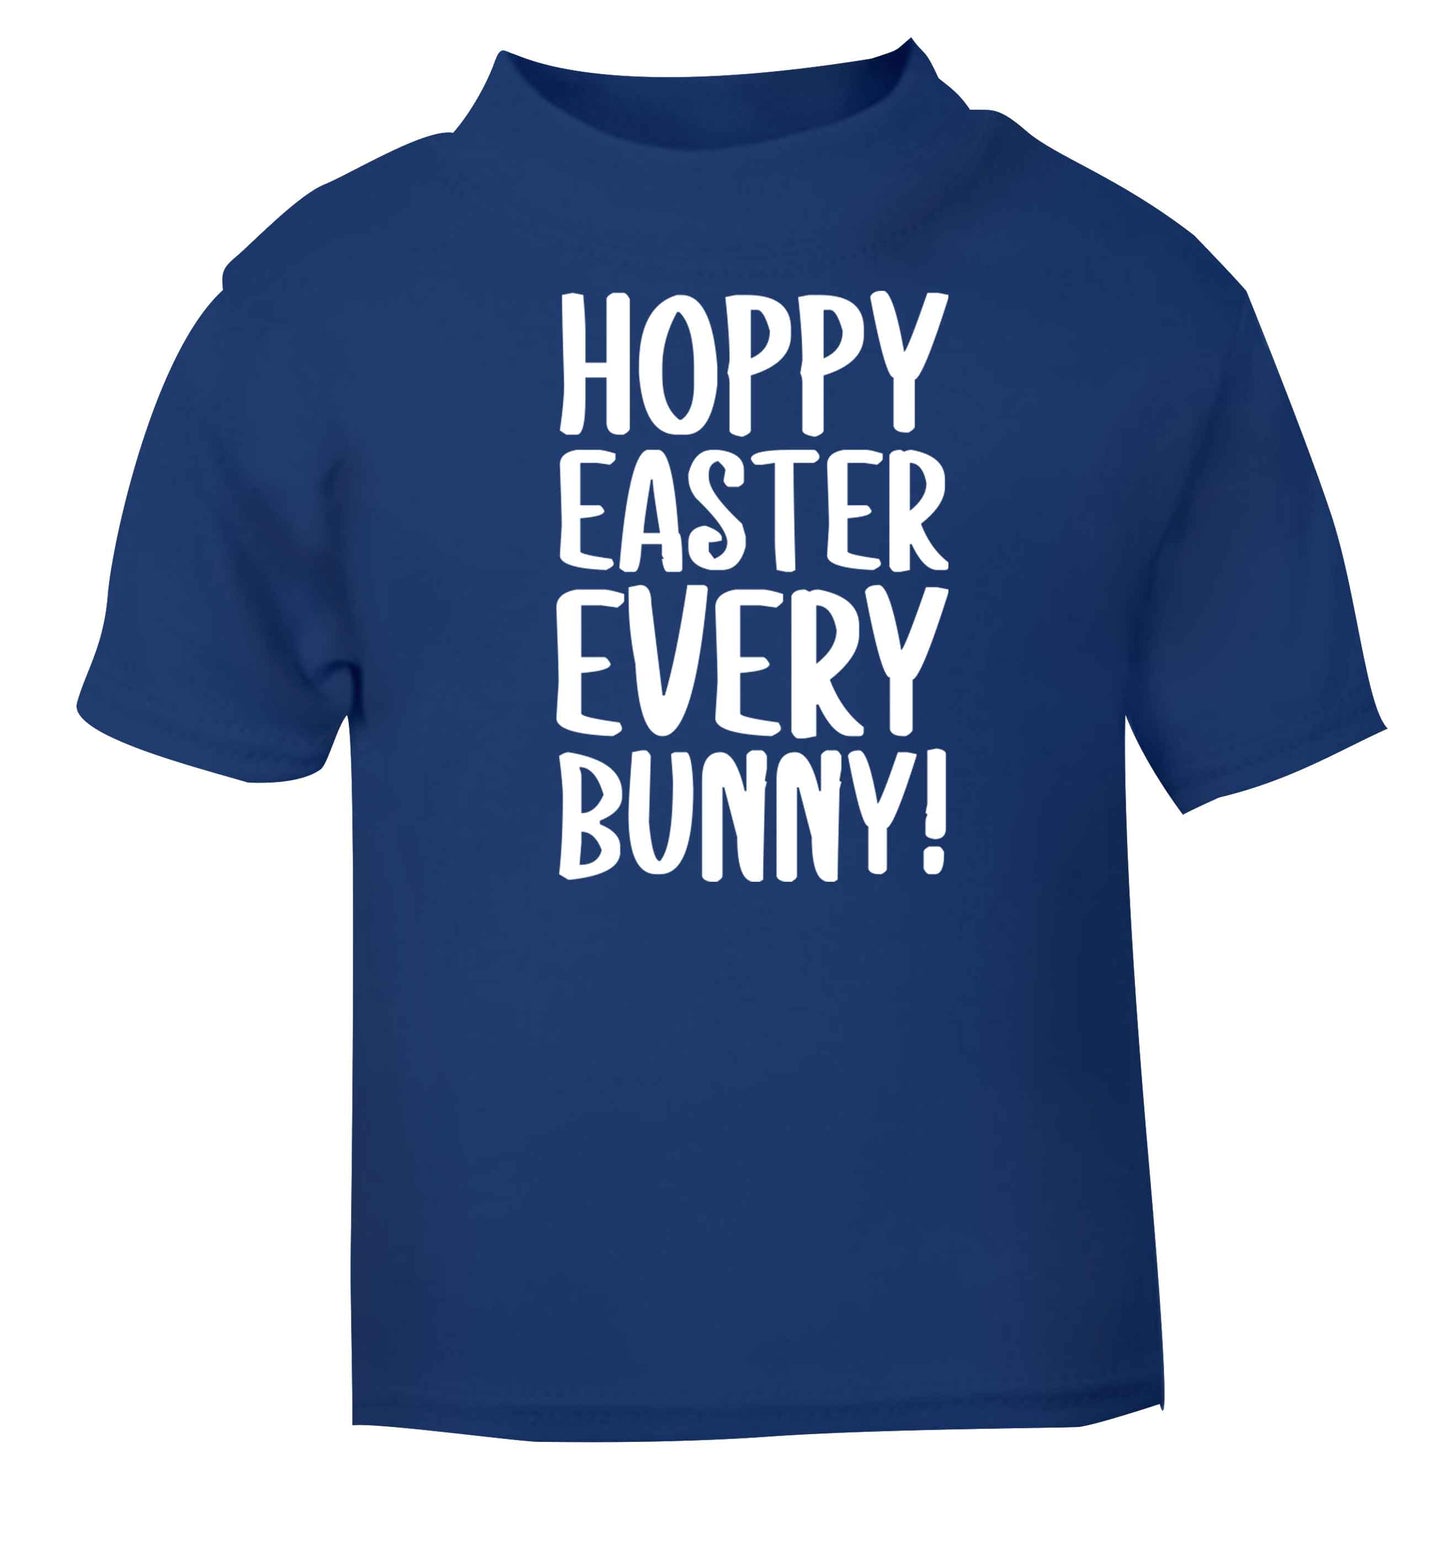 Hoppy Easter every bunny! blue baby toddler Tshirt 2 Years